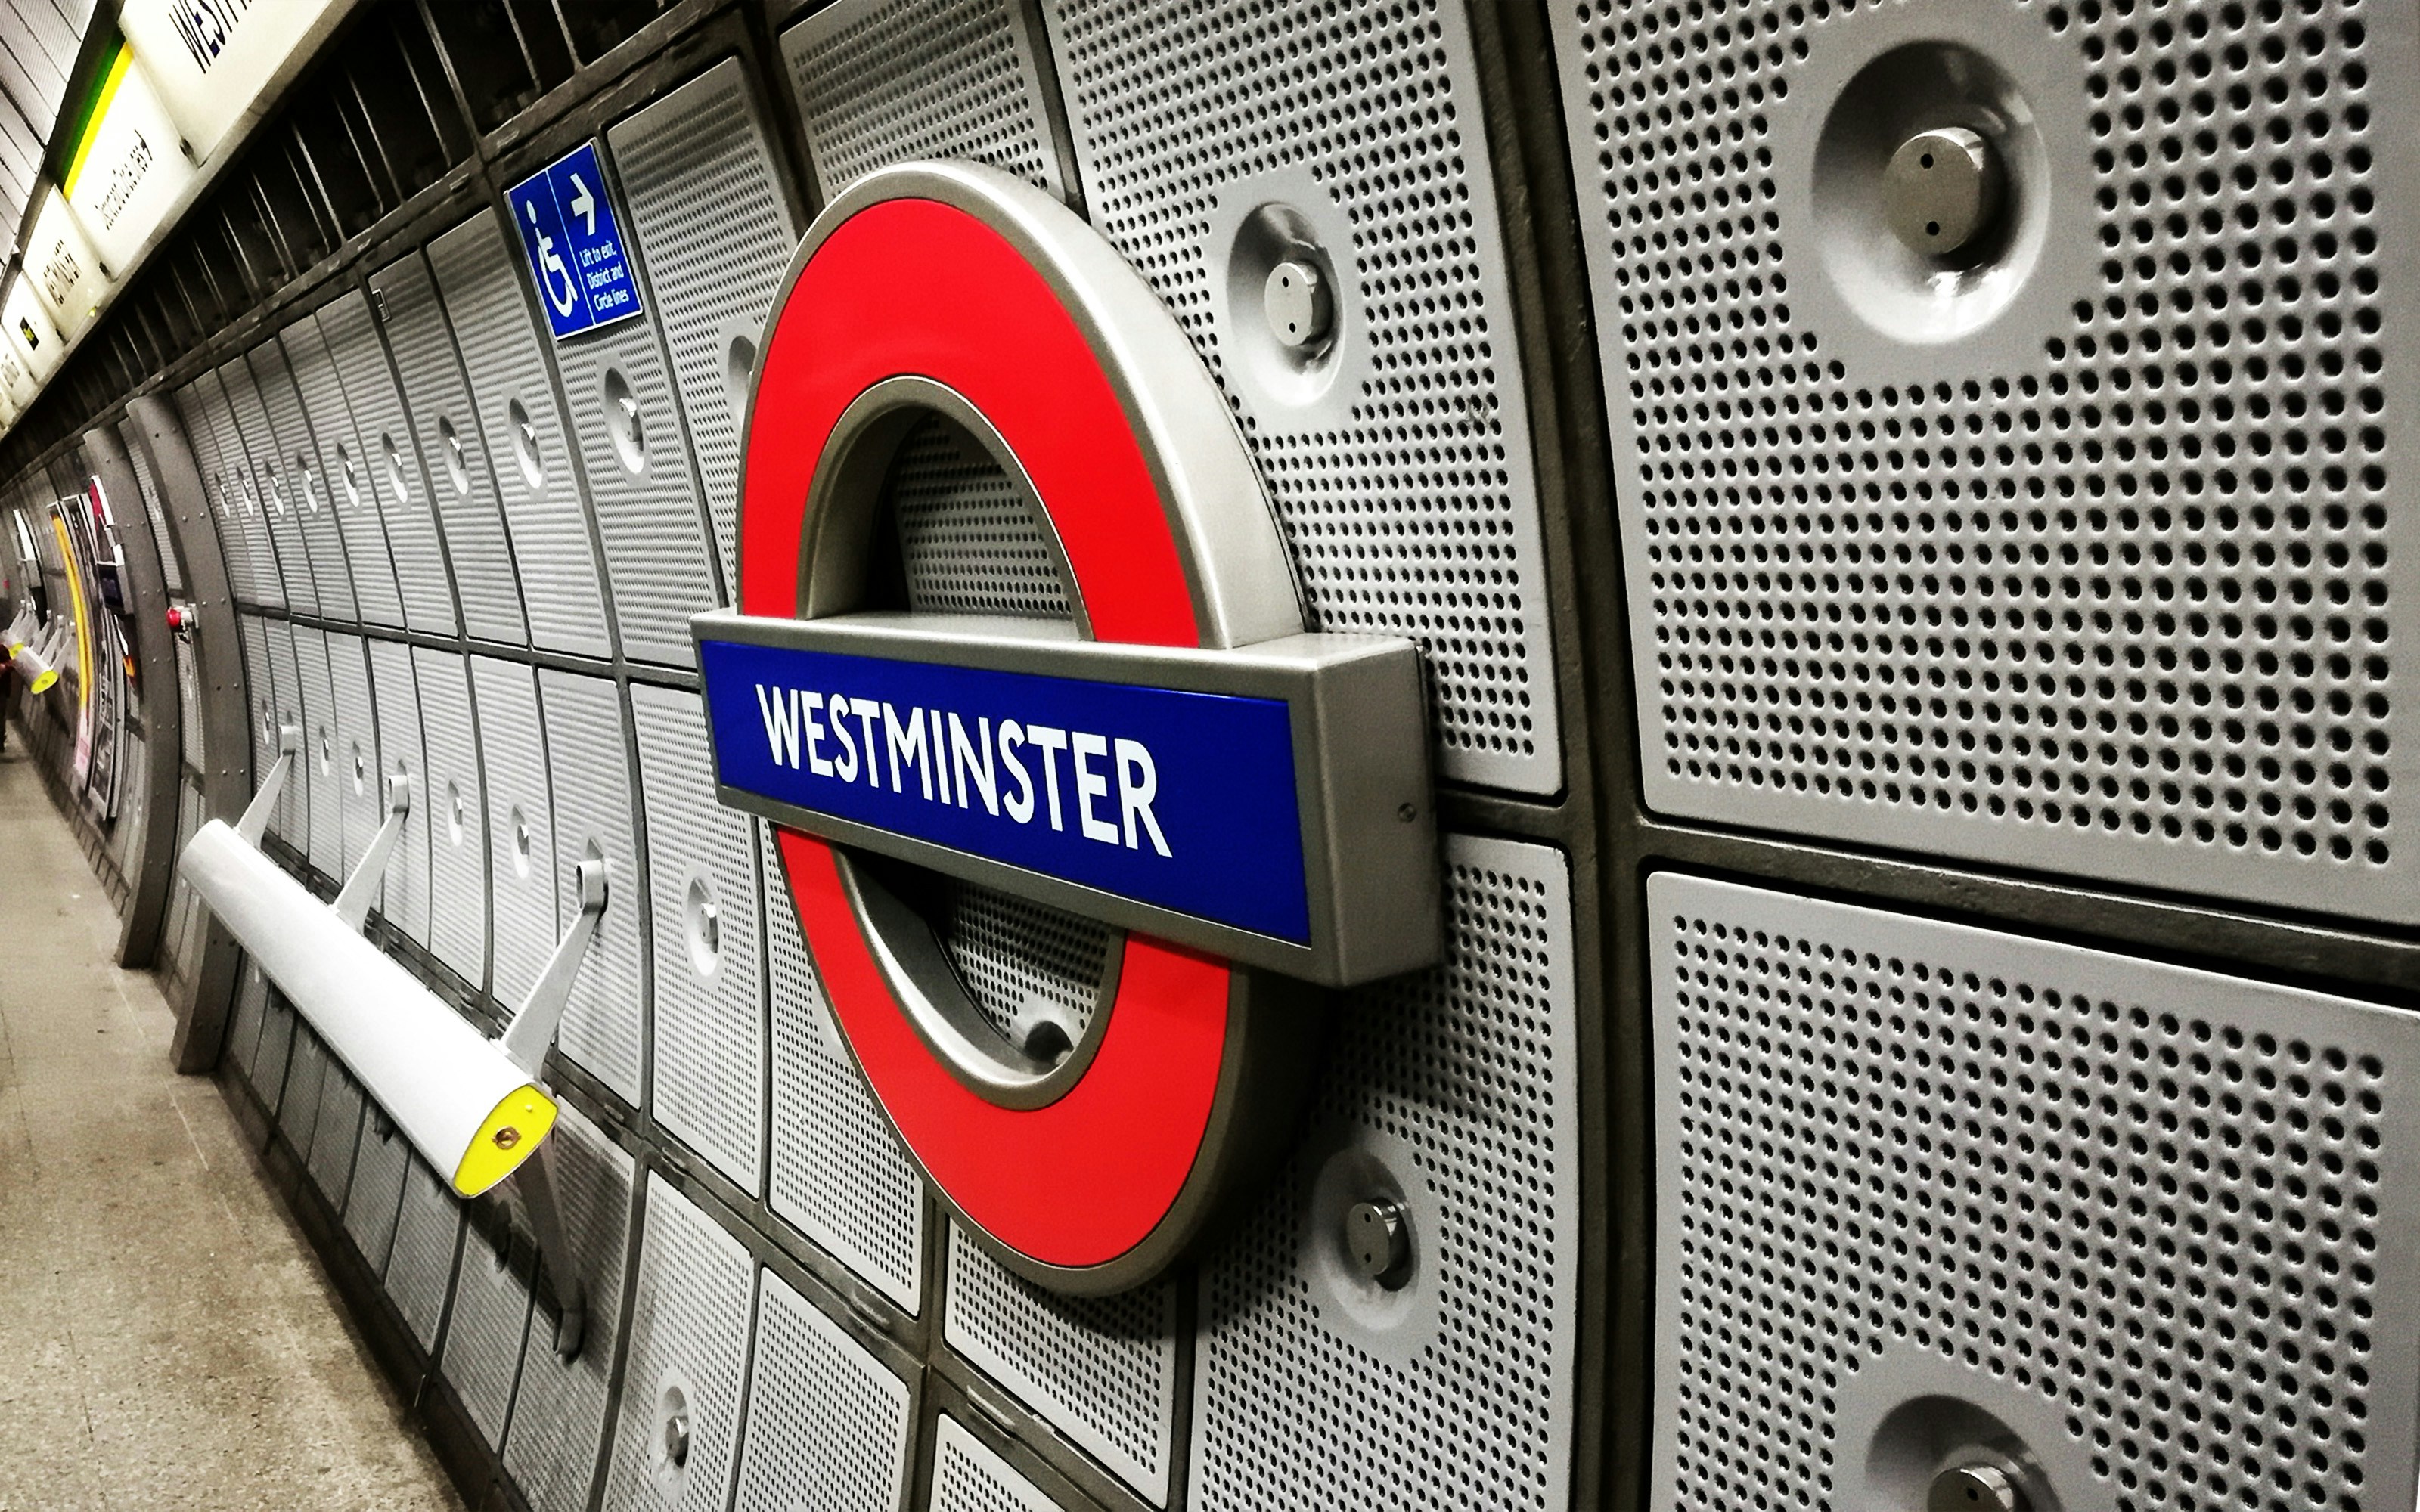 London Underground station for Westminster, London